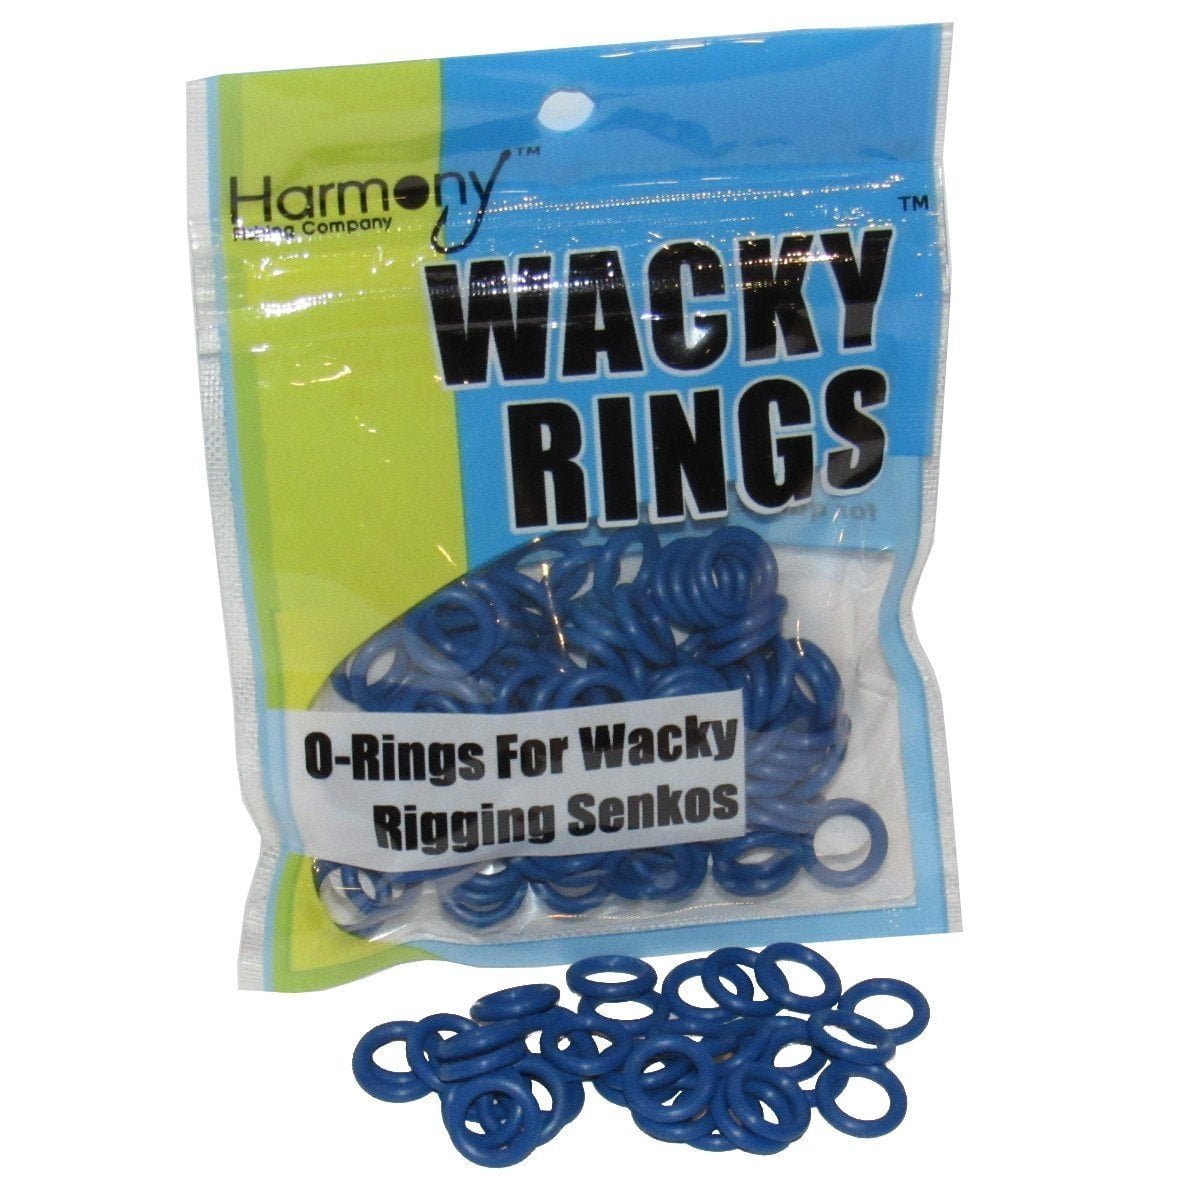 50 PIECES  O RINGS FOR WACKY RIGGING 4'' OR 5" PLASTIC STICK BAITS 